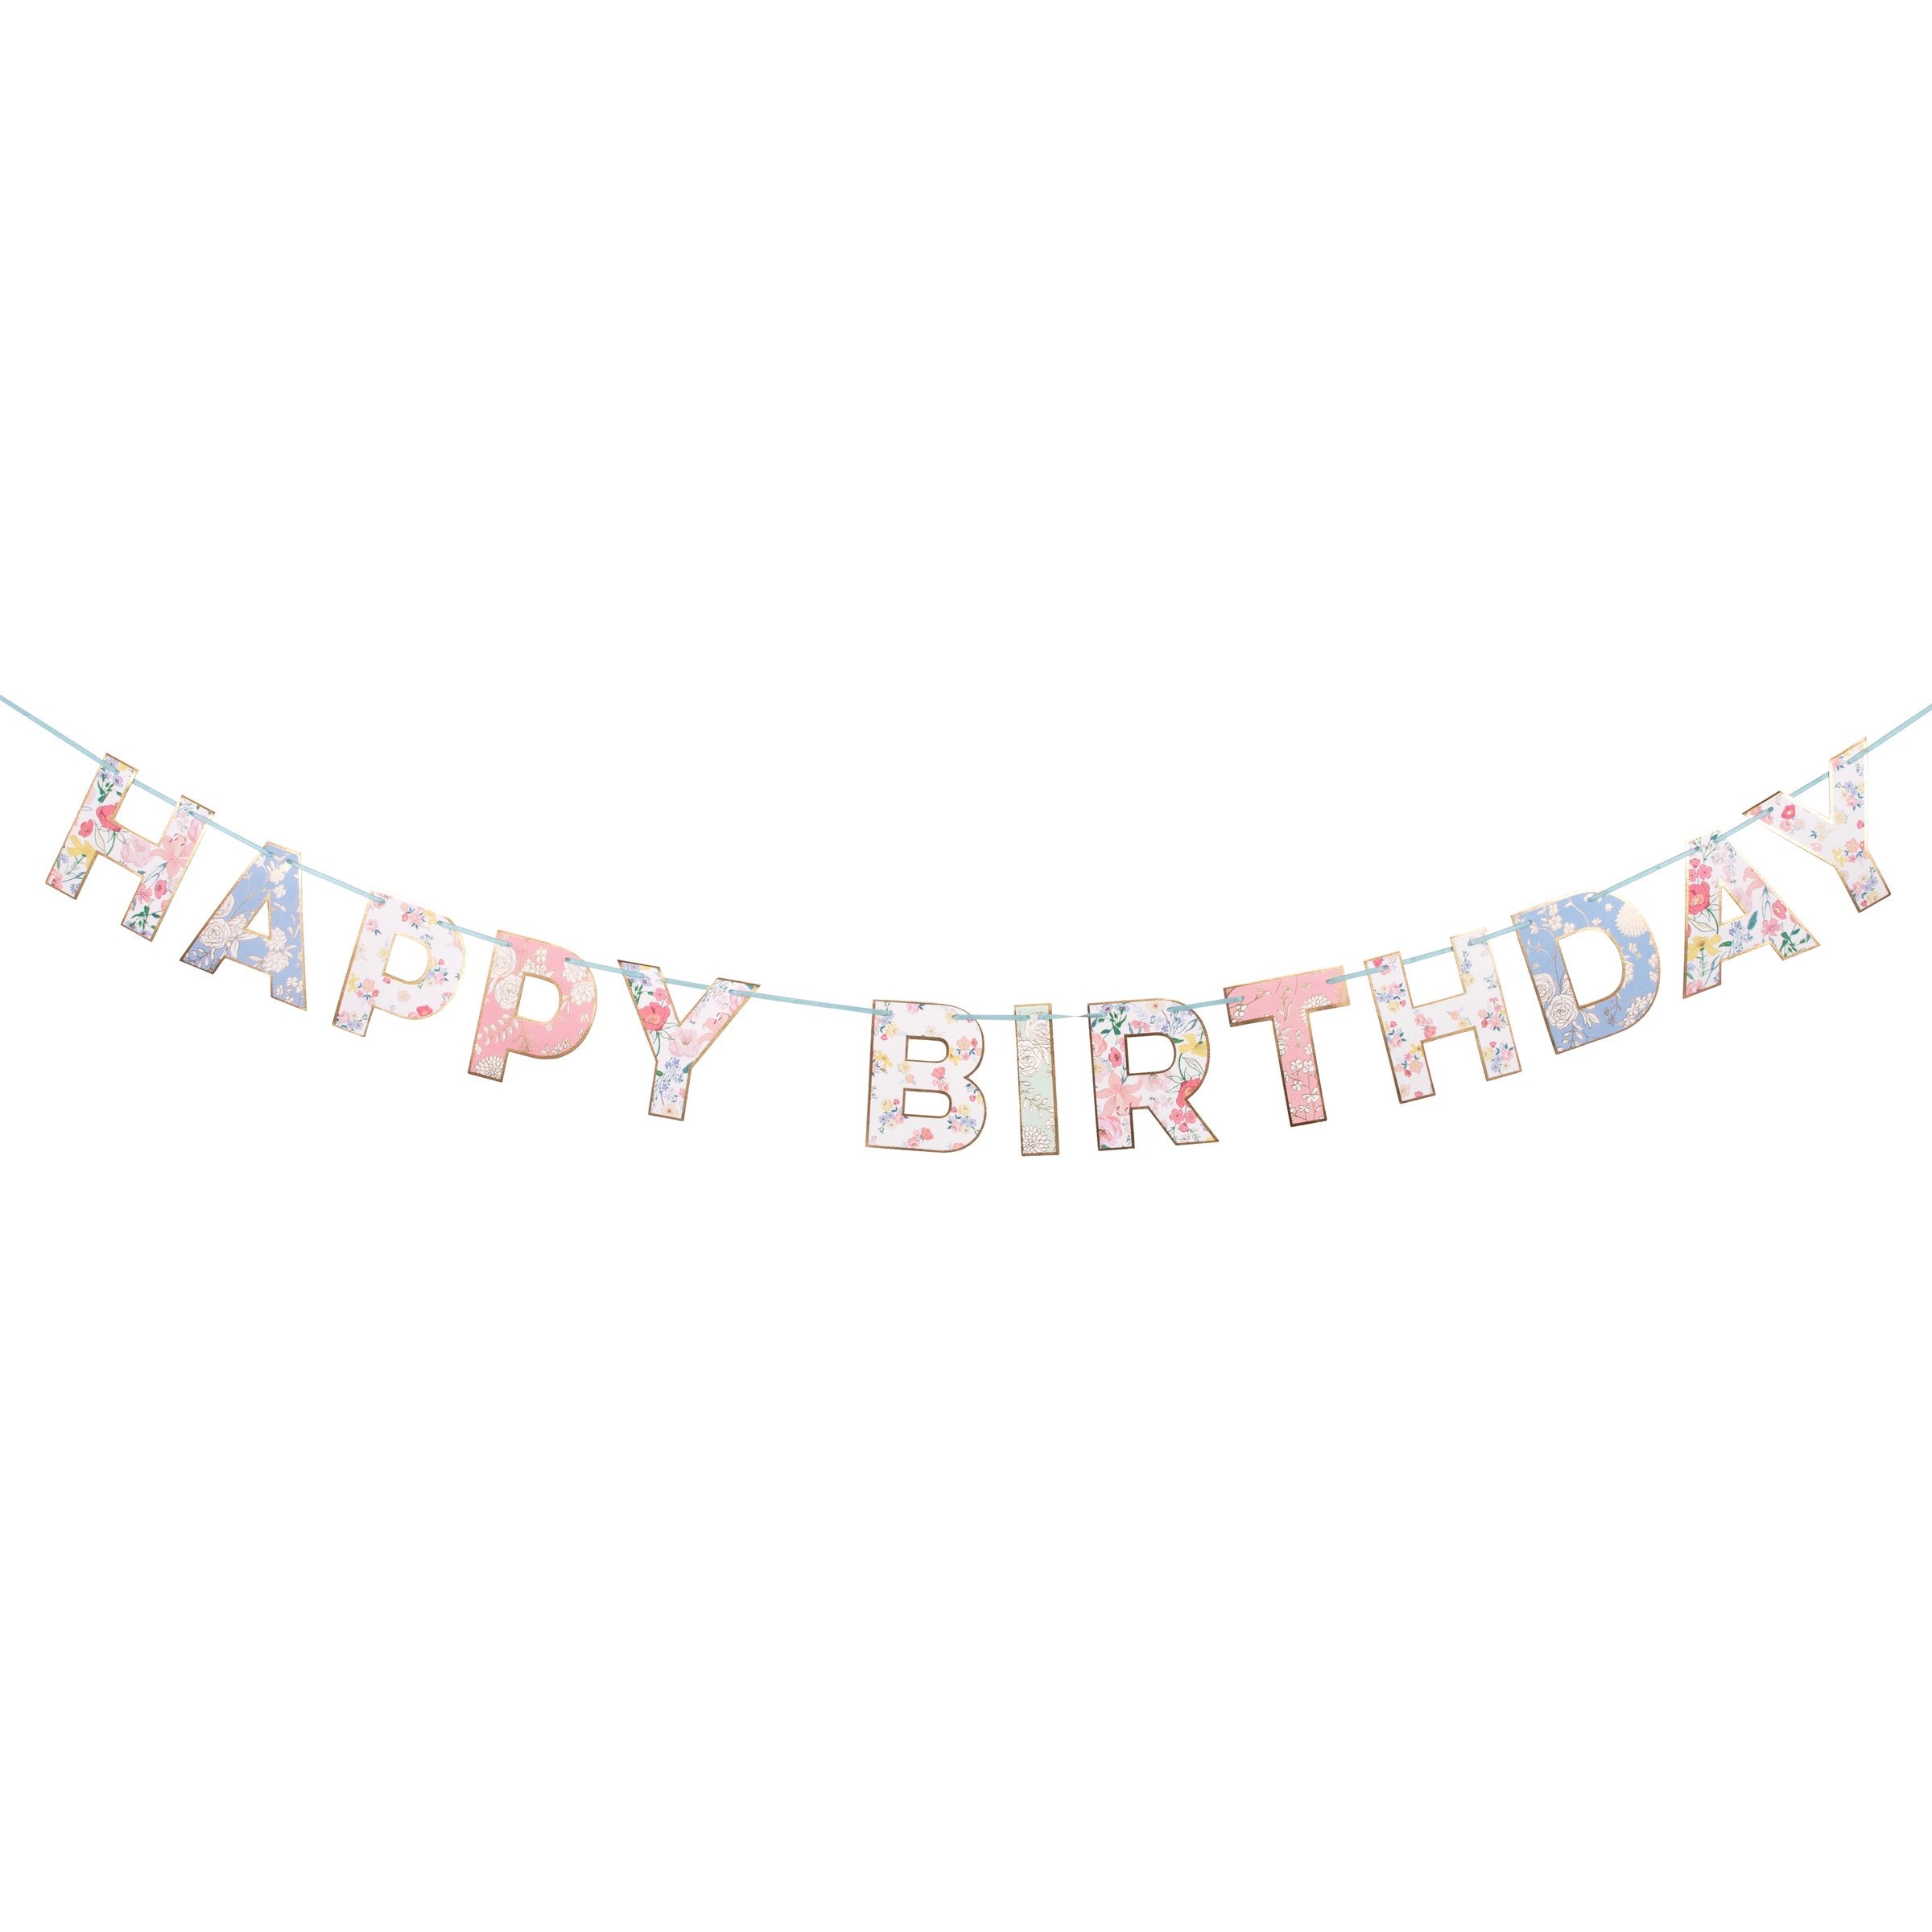 Our party garland spells out the words Happy Birthday with pretty floral designs.